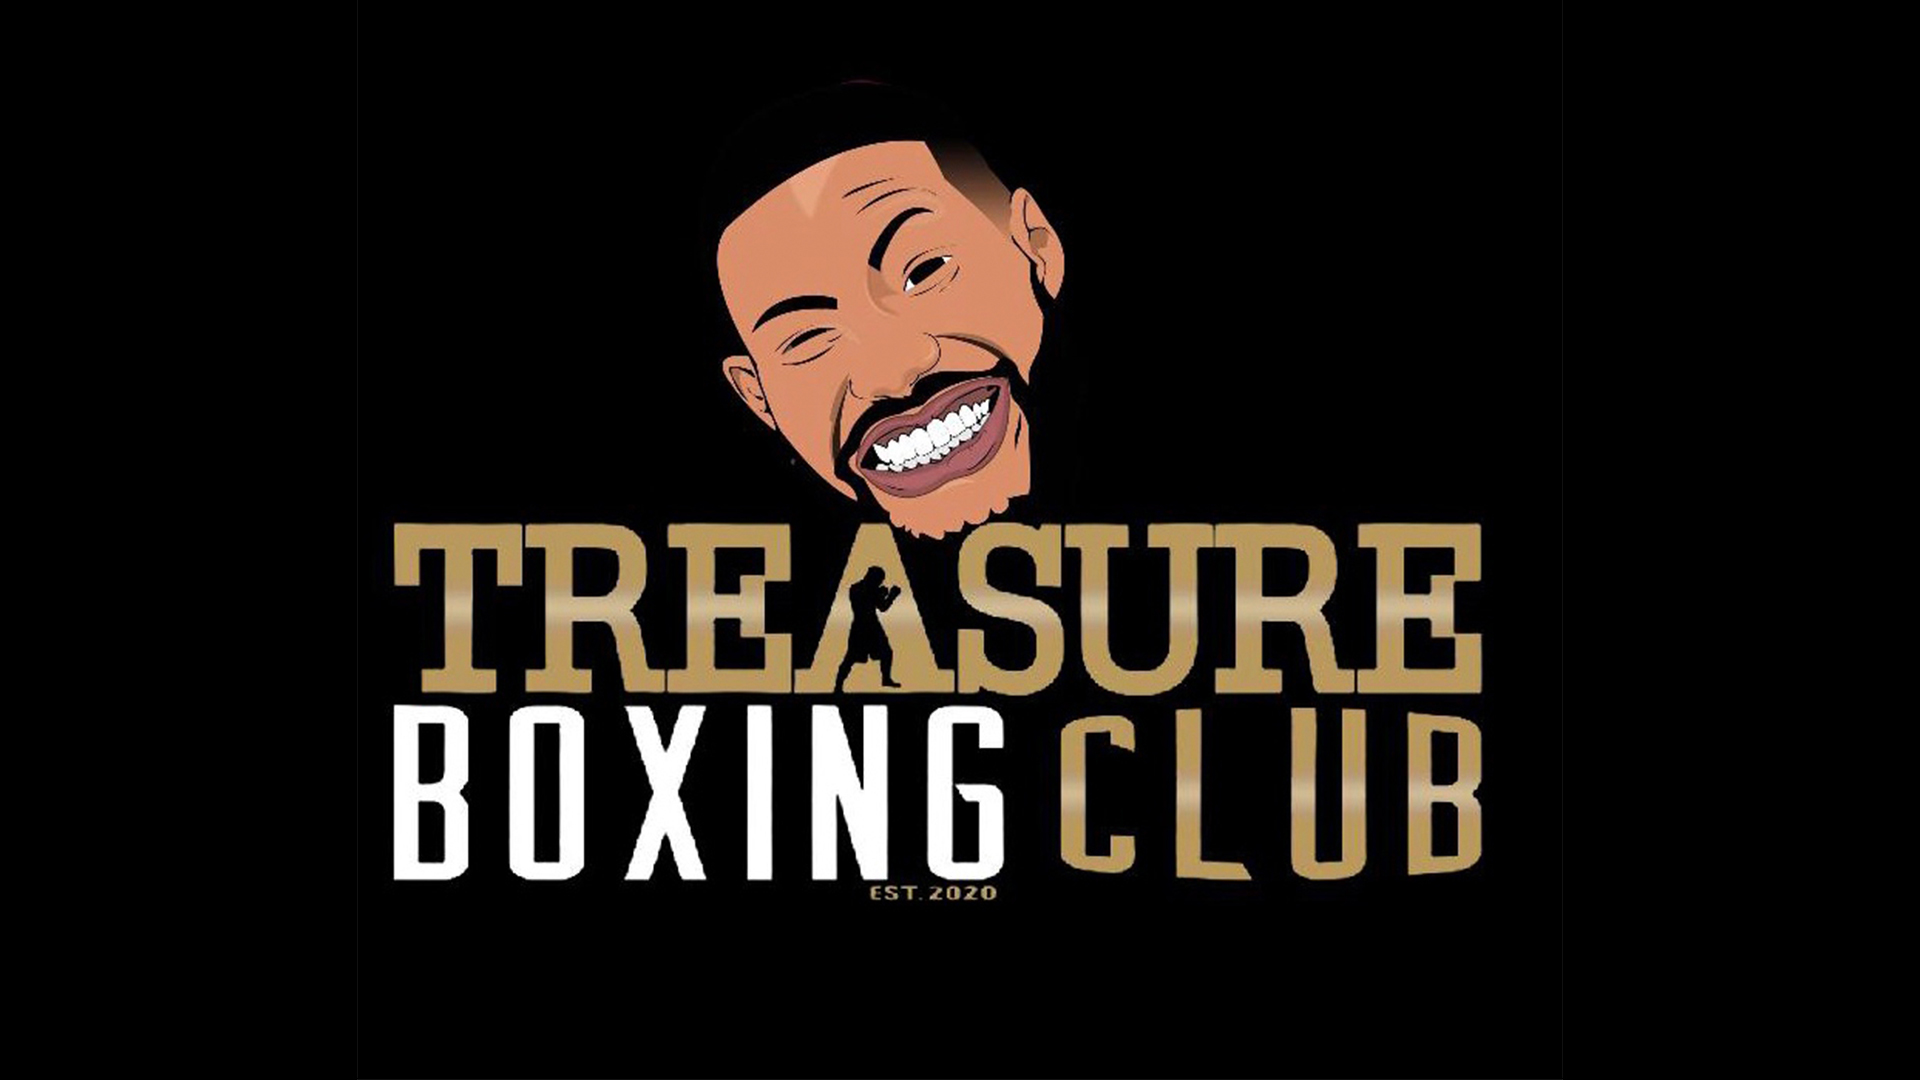 Treasure boxing Our City